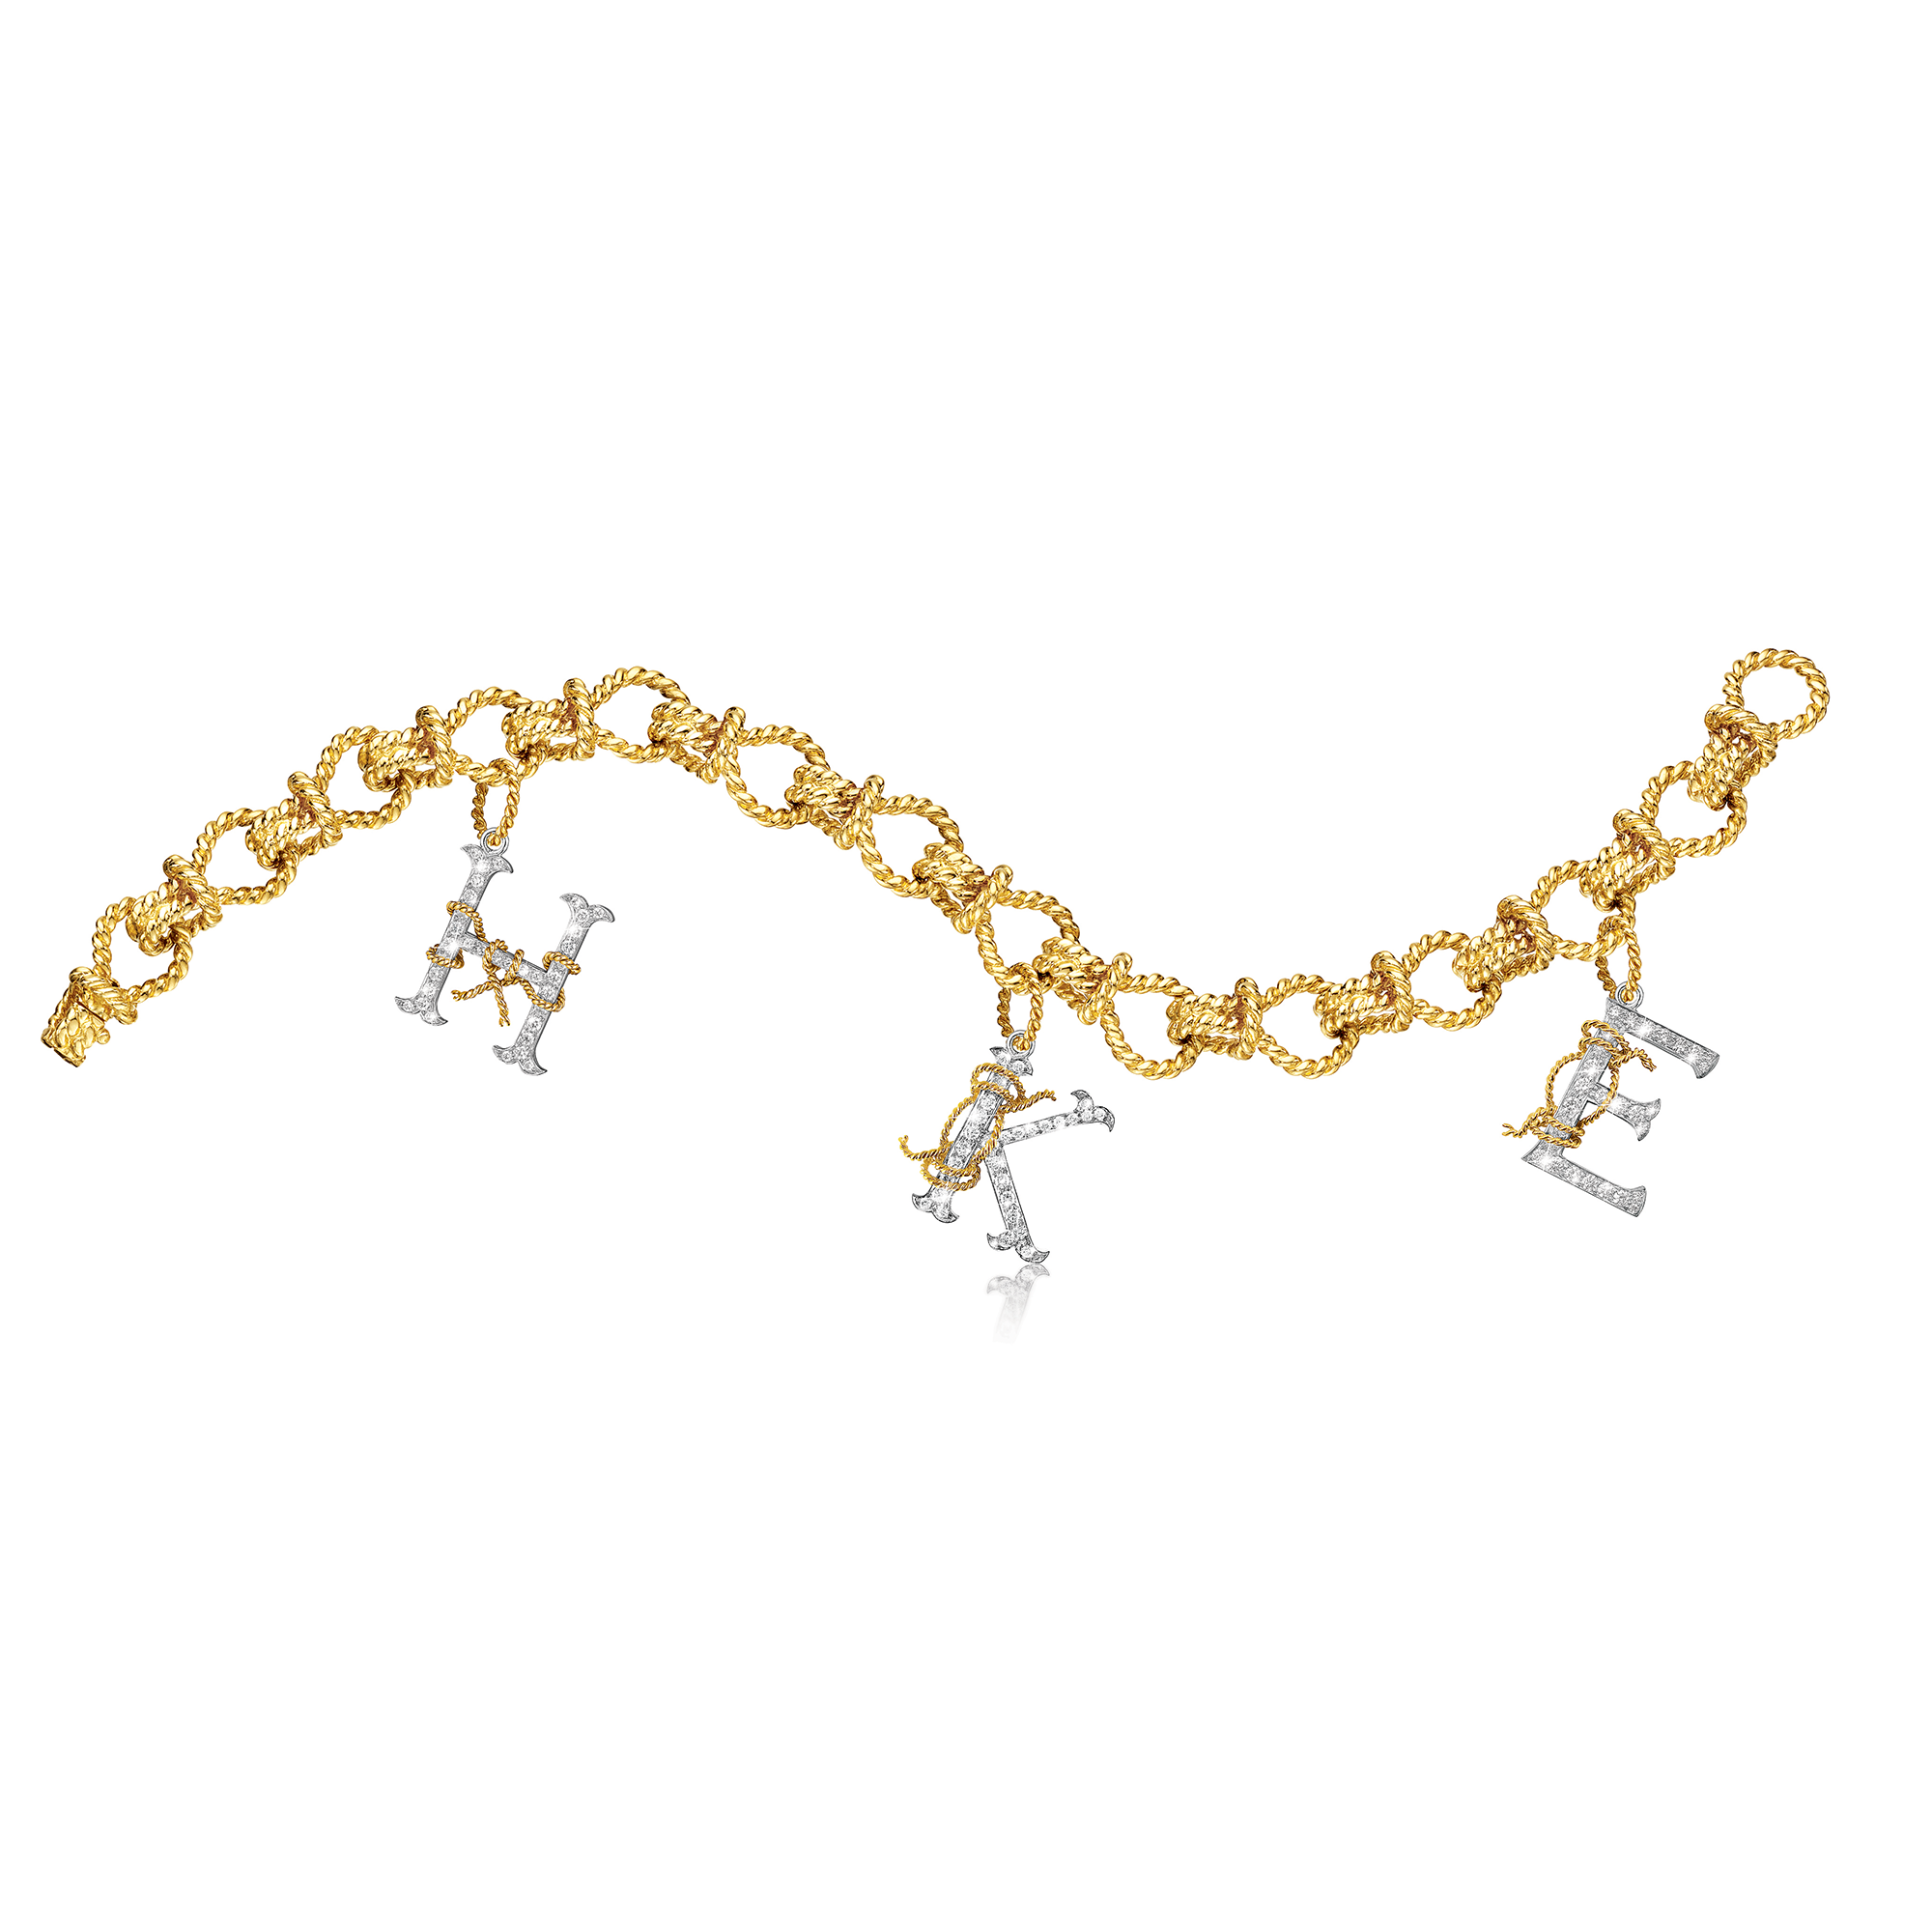 Initial charm bracelet in gold and diamond